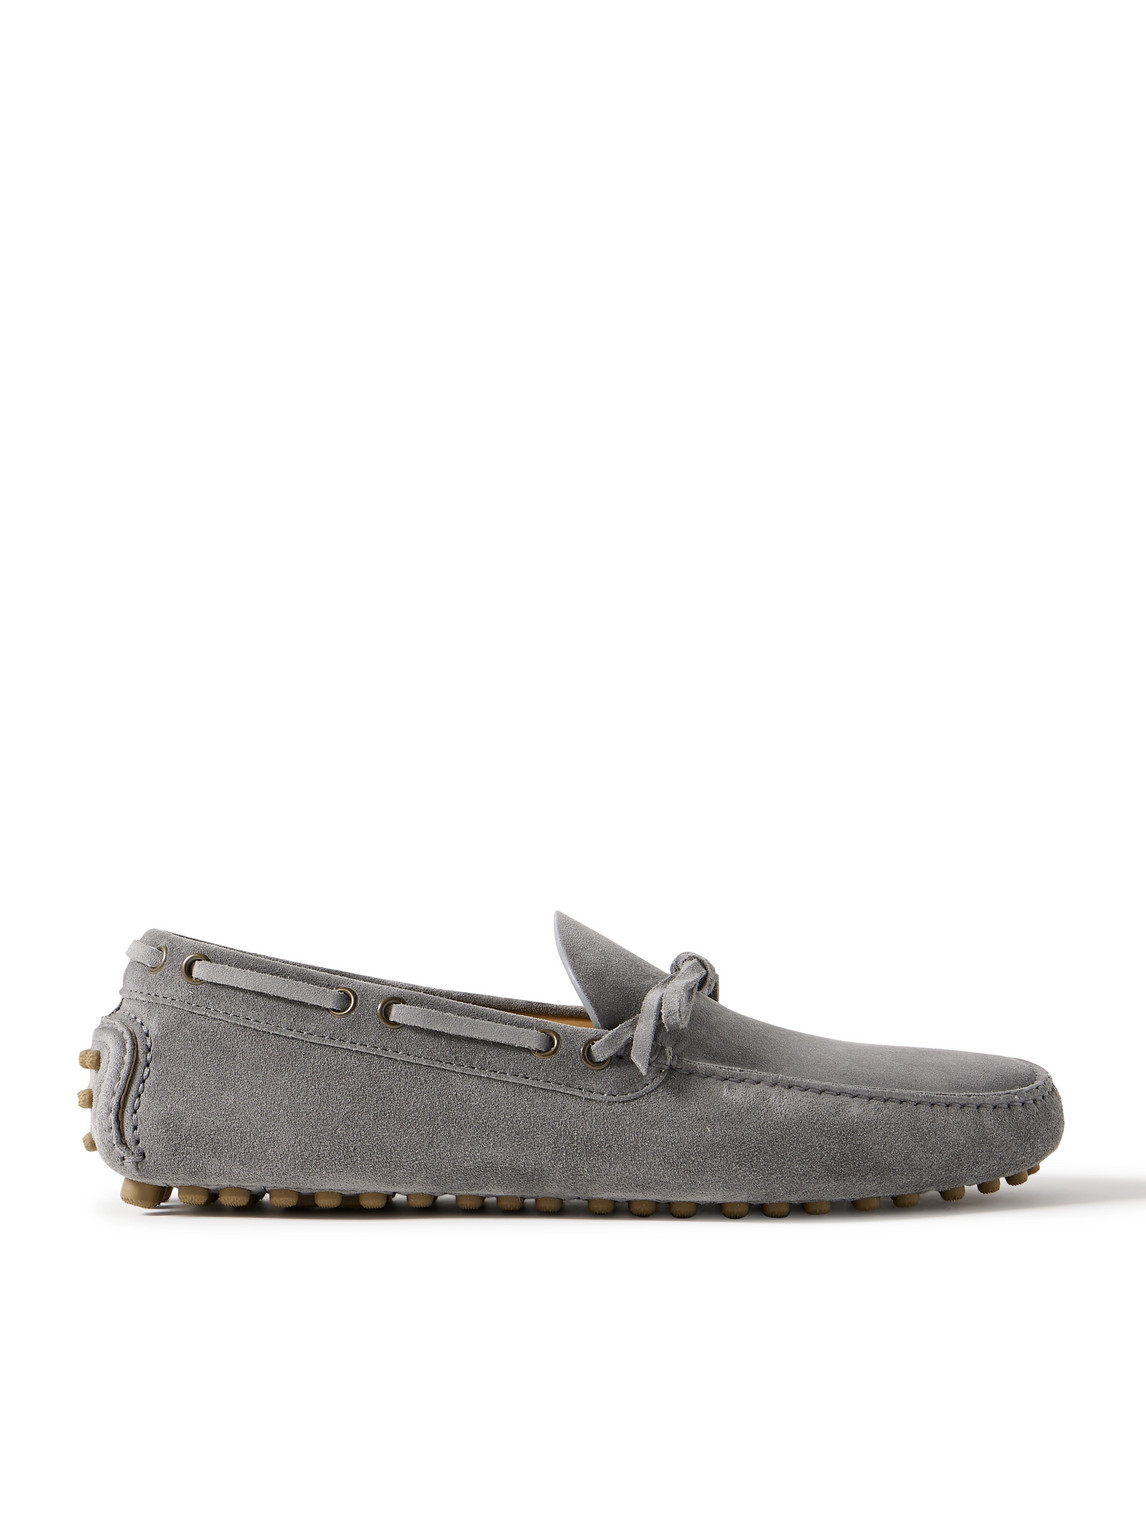 Brunello Cucinelli Suede Driving Shoes In Gray